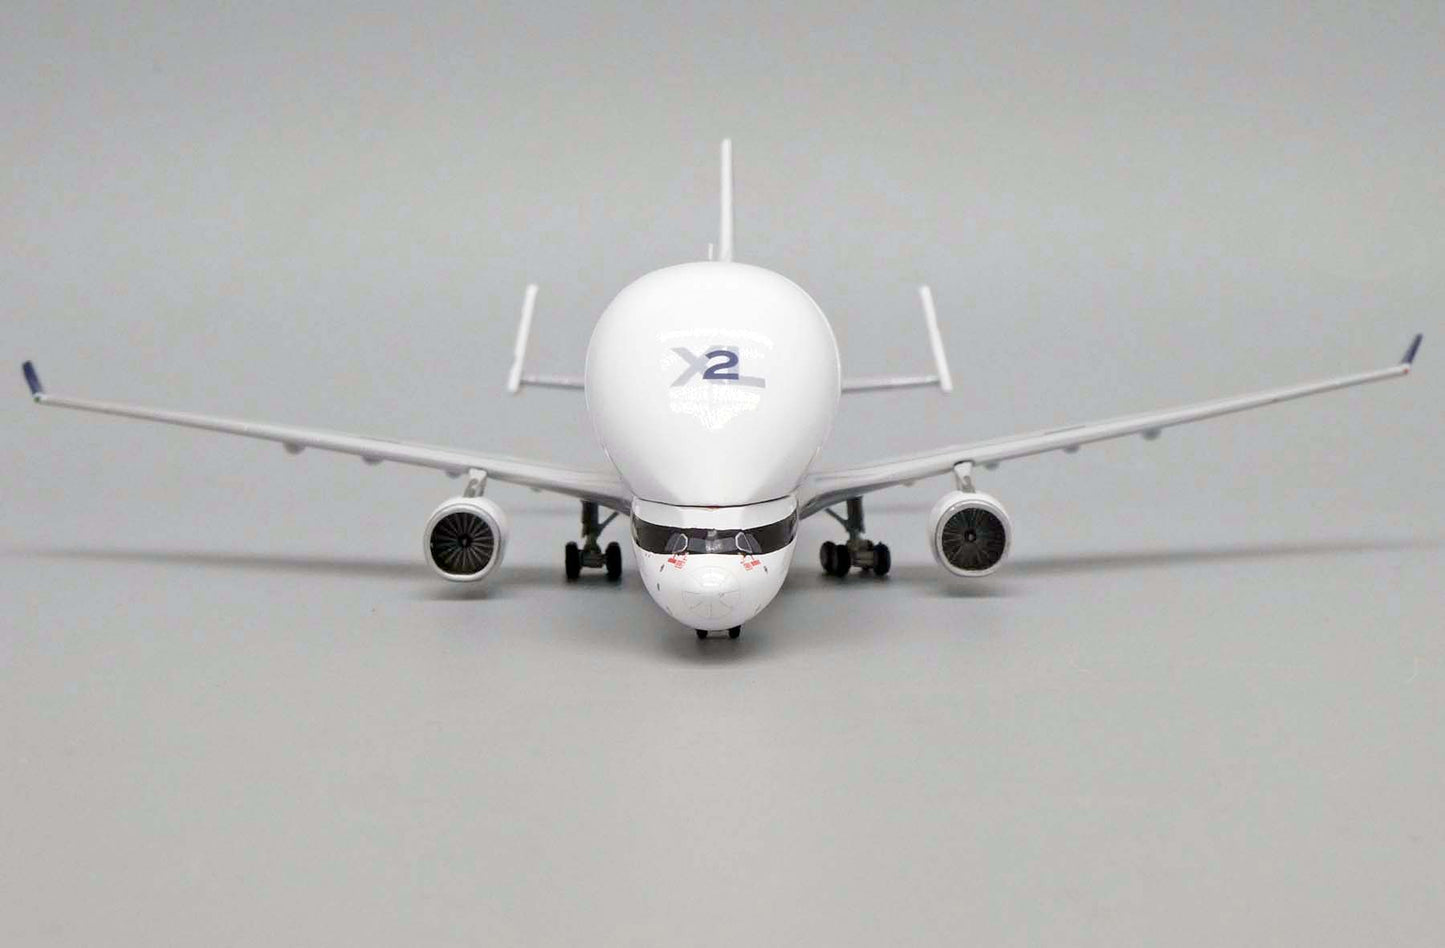 1:400 JC Wings Airbus House Colors Beluga XL "Interactive" F-GXLH LH4180